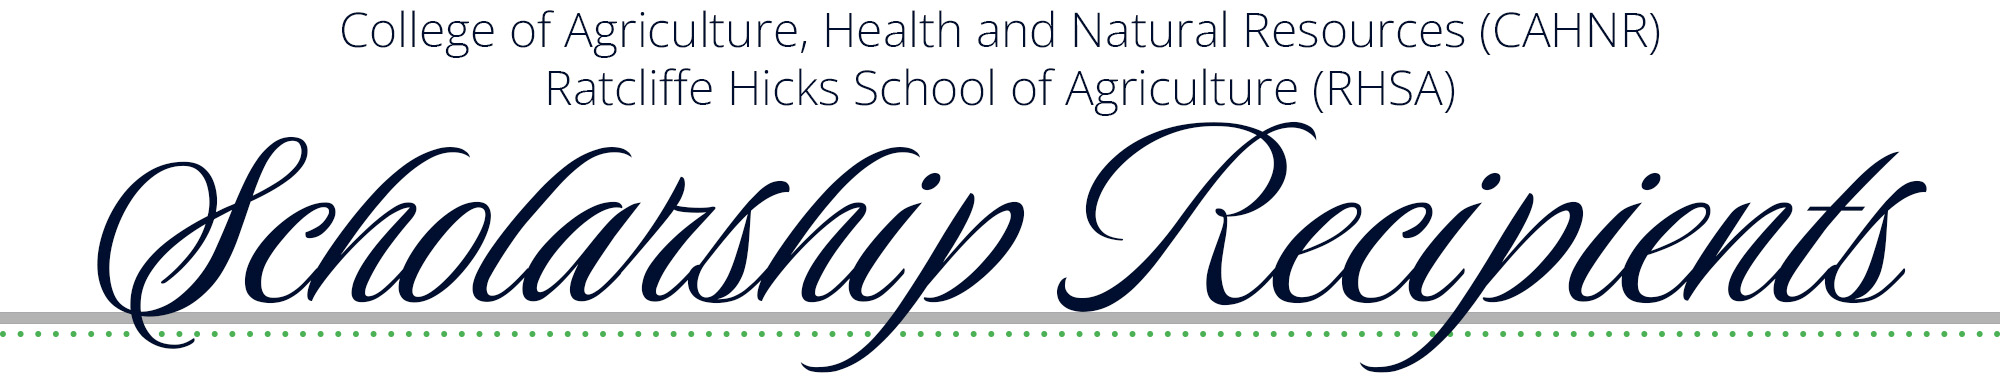 College of Agriculture, Health and Natural Resources (CAHNR) Ratcliffe Hicks School of Agriculture (RHSA) Scholarship Recipients 2023-2024